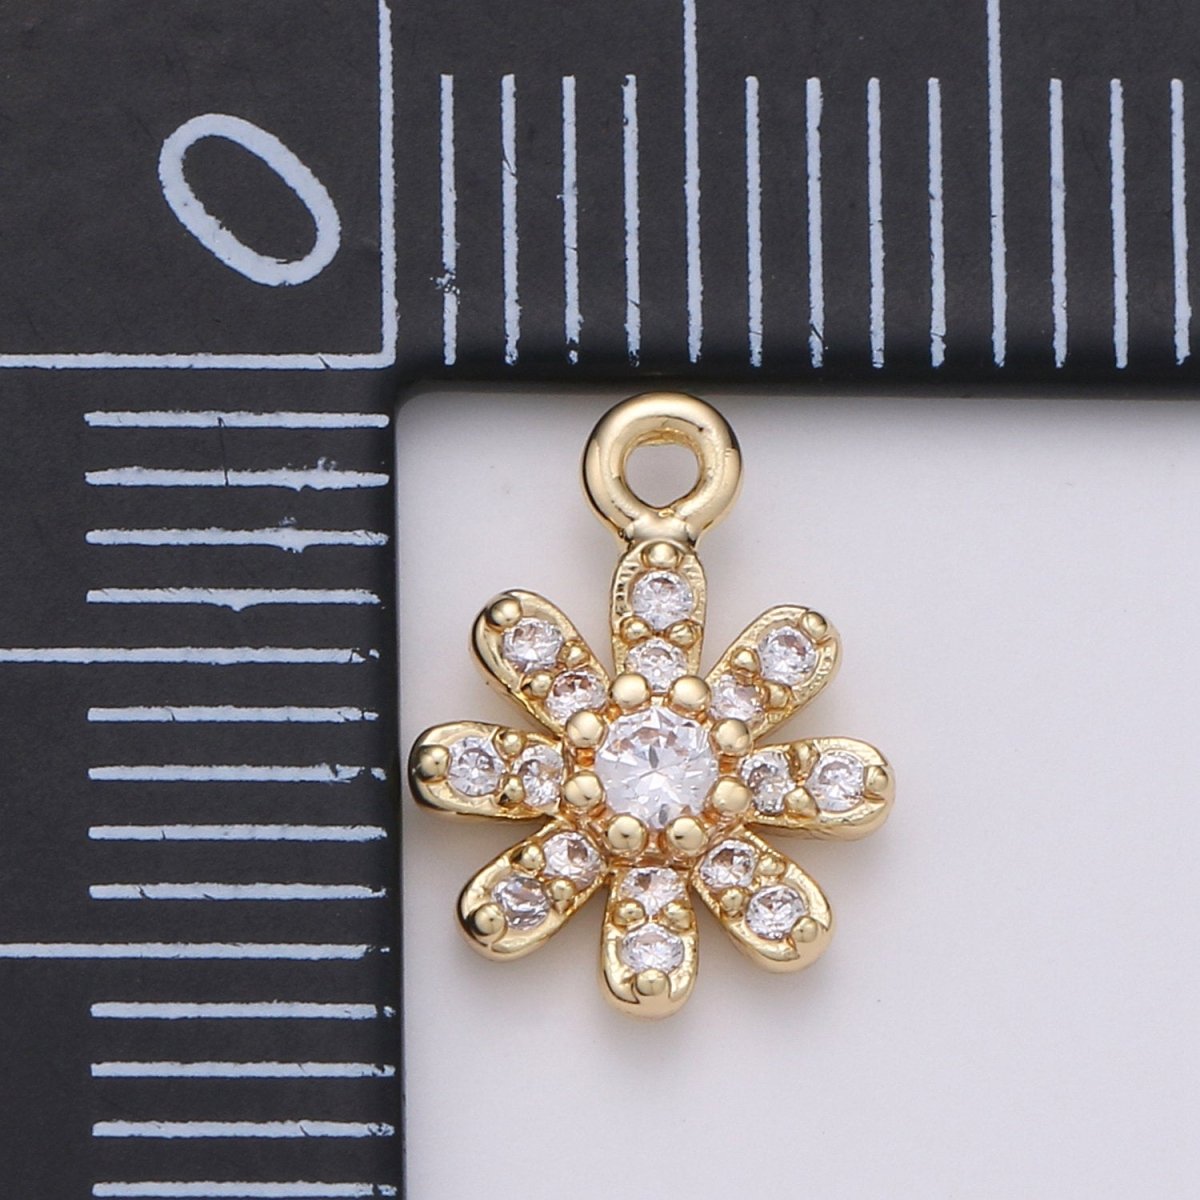 Gold Sunflower / Gold Daisy Charm 11x8mm - Mini Flower Charm Dainty sun flower Charm for bracelet earring necklace supply | D-405 - DLUXCA